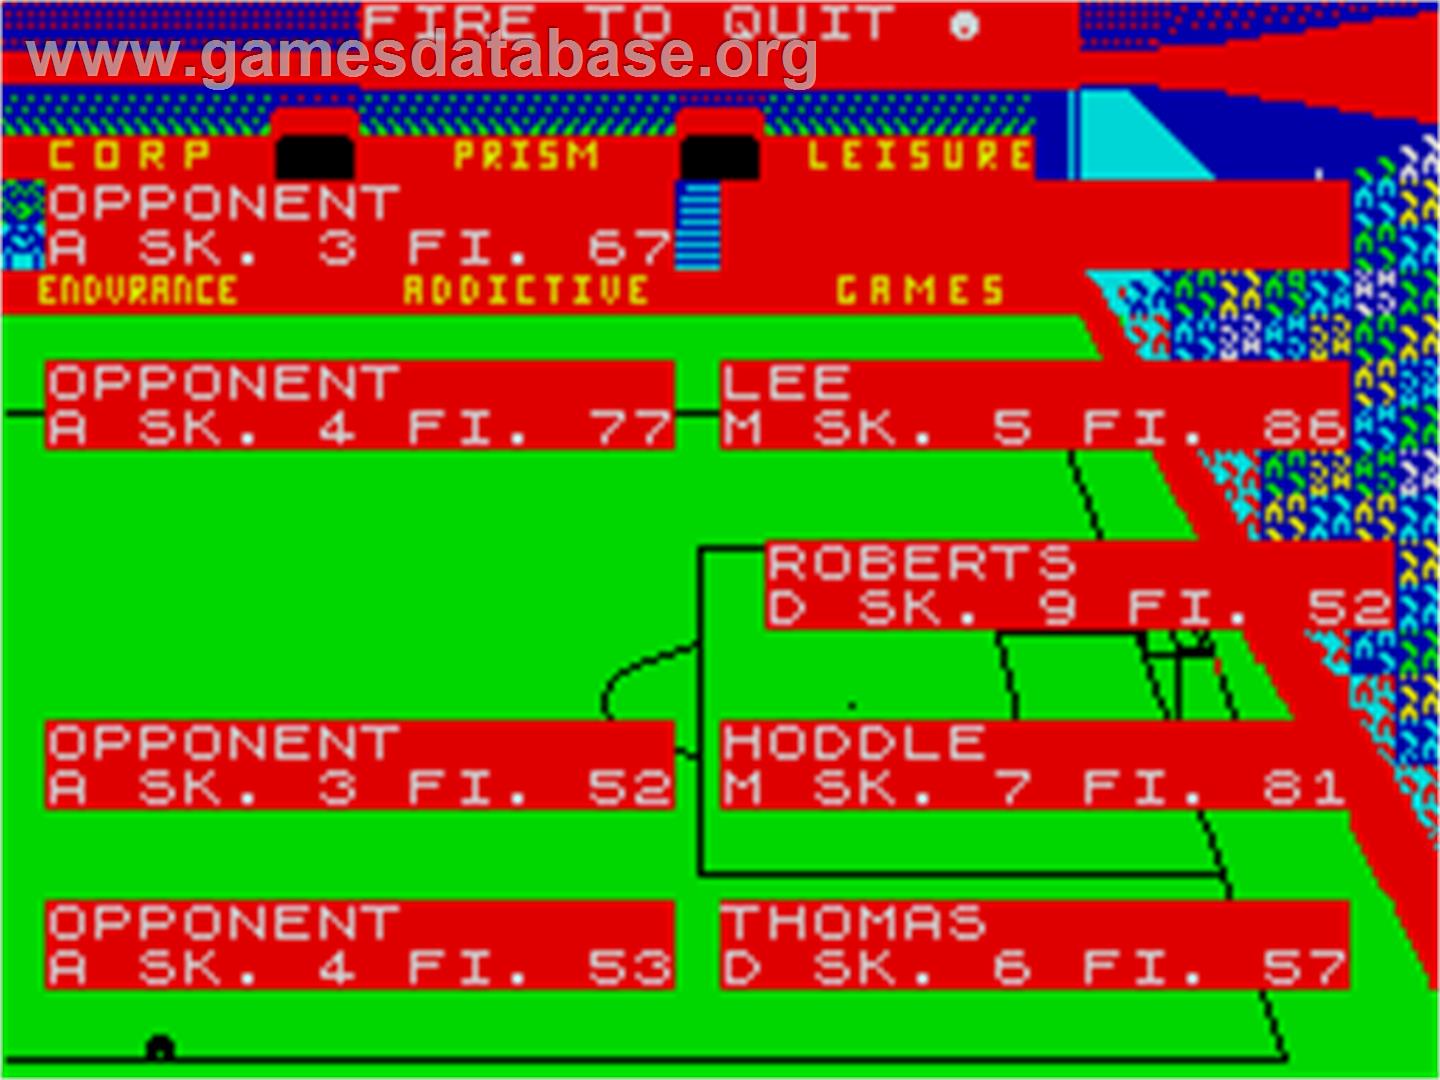 Football Manager 2 - Sinclair ZX Spectrum - Artwork - In Game